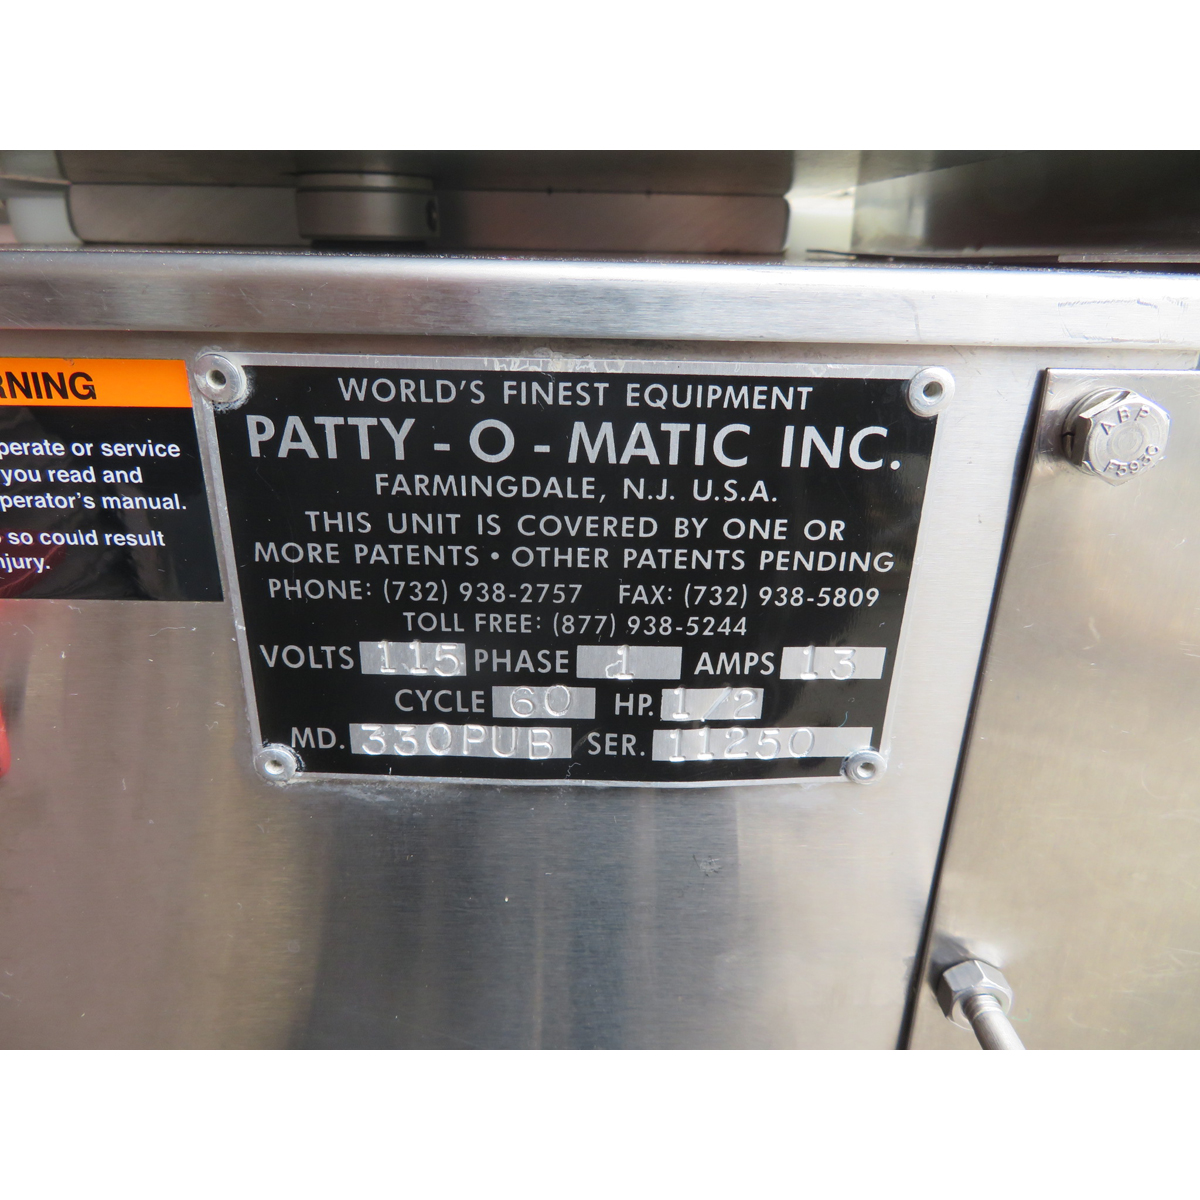 Patty-O-Matic 330PUB Patty Maker, Used Excellent Condition image 5